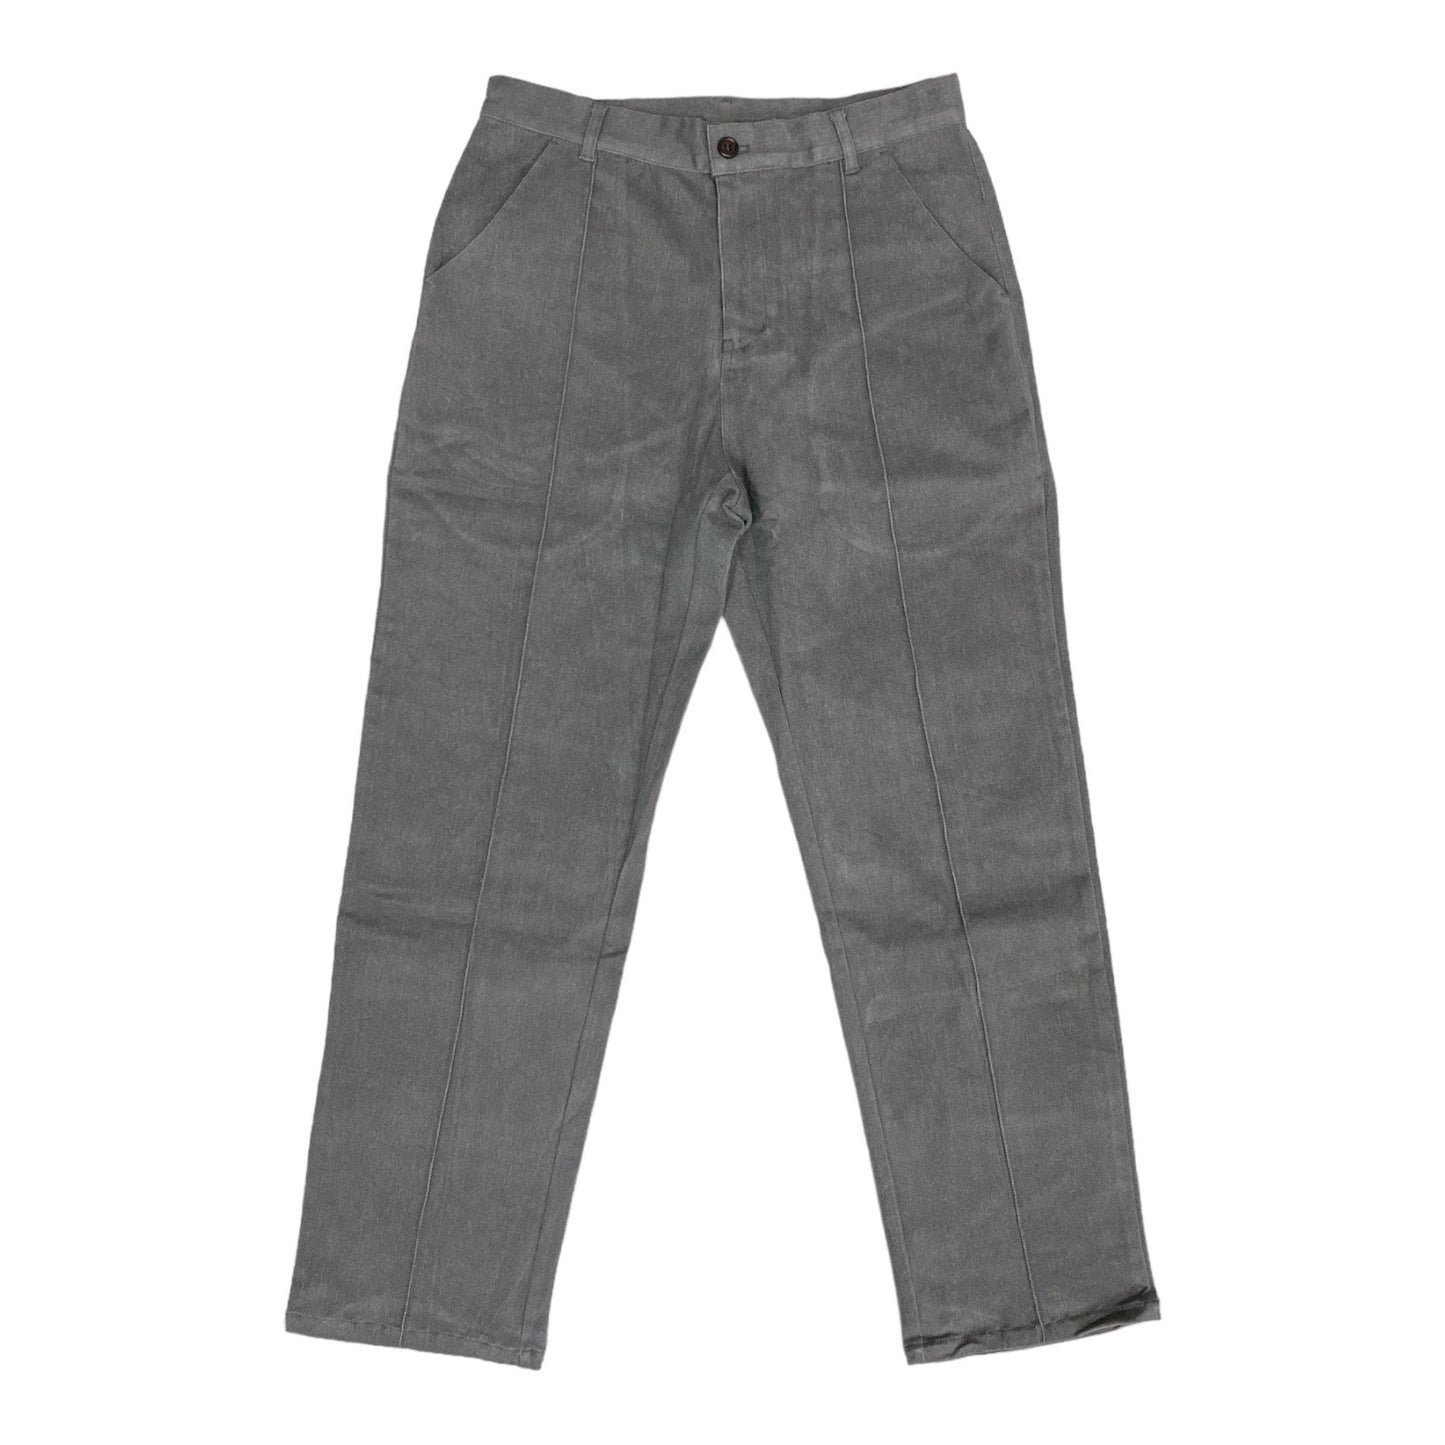 SEXHIPPIES Stitched Crease Work Pant- Slate